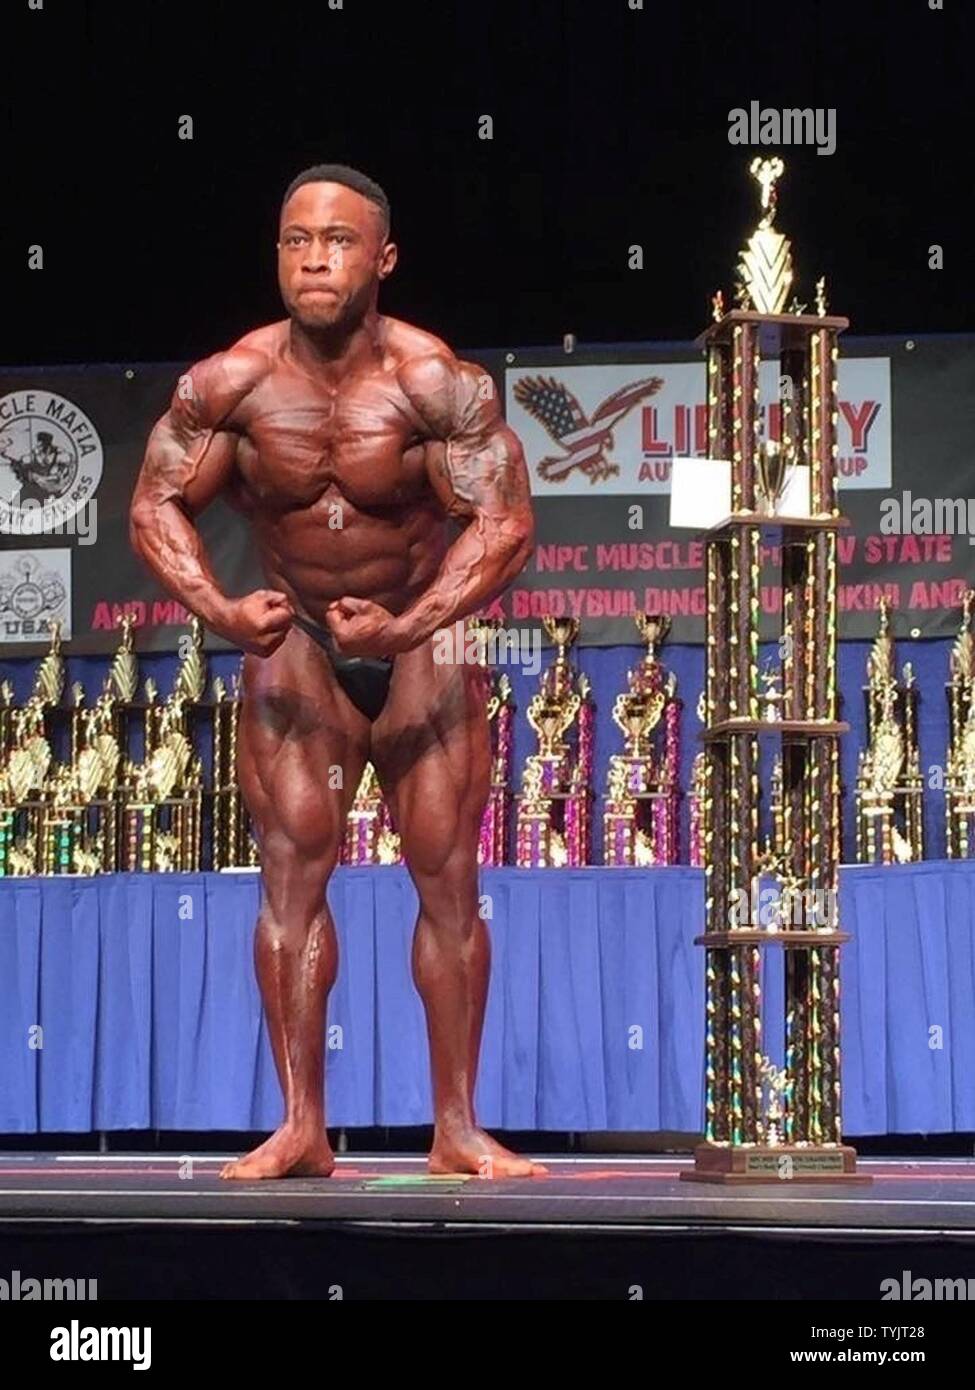 1st Lt. Stephen Bell with the 316thMission Support Element won the Light Heavyweight class division at the National Physique Committee Mid Atlantic Grand Prix, in Wheeling, W.Va., Nov. 11, 2016. The class win enabled Bell to compete in the overall event consisting of 220 competitors to take first place, beating Mr. West Virginia, the Heavyweight and Super Heavyweight champion. Stock Photo